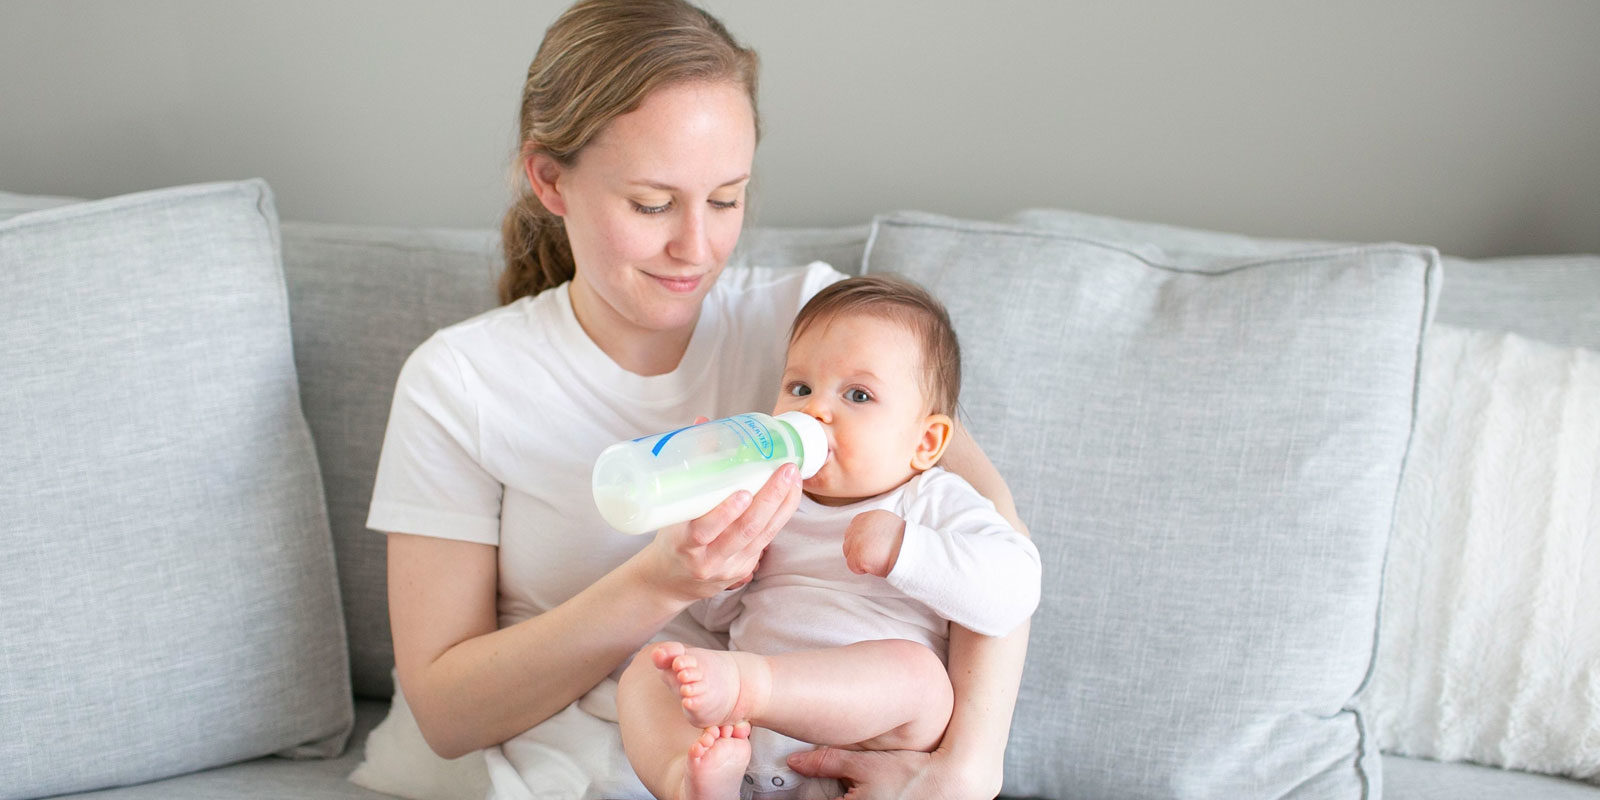 How to Prepare New Caregivers to Feed a Baby: Planning Tips for Parents